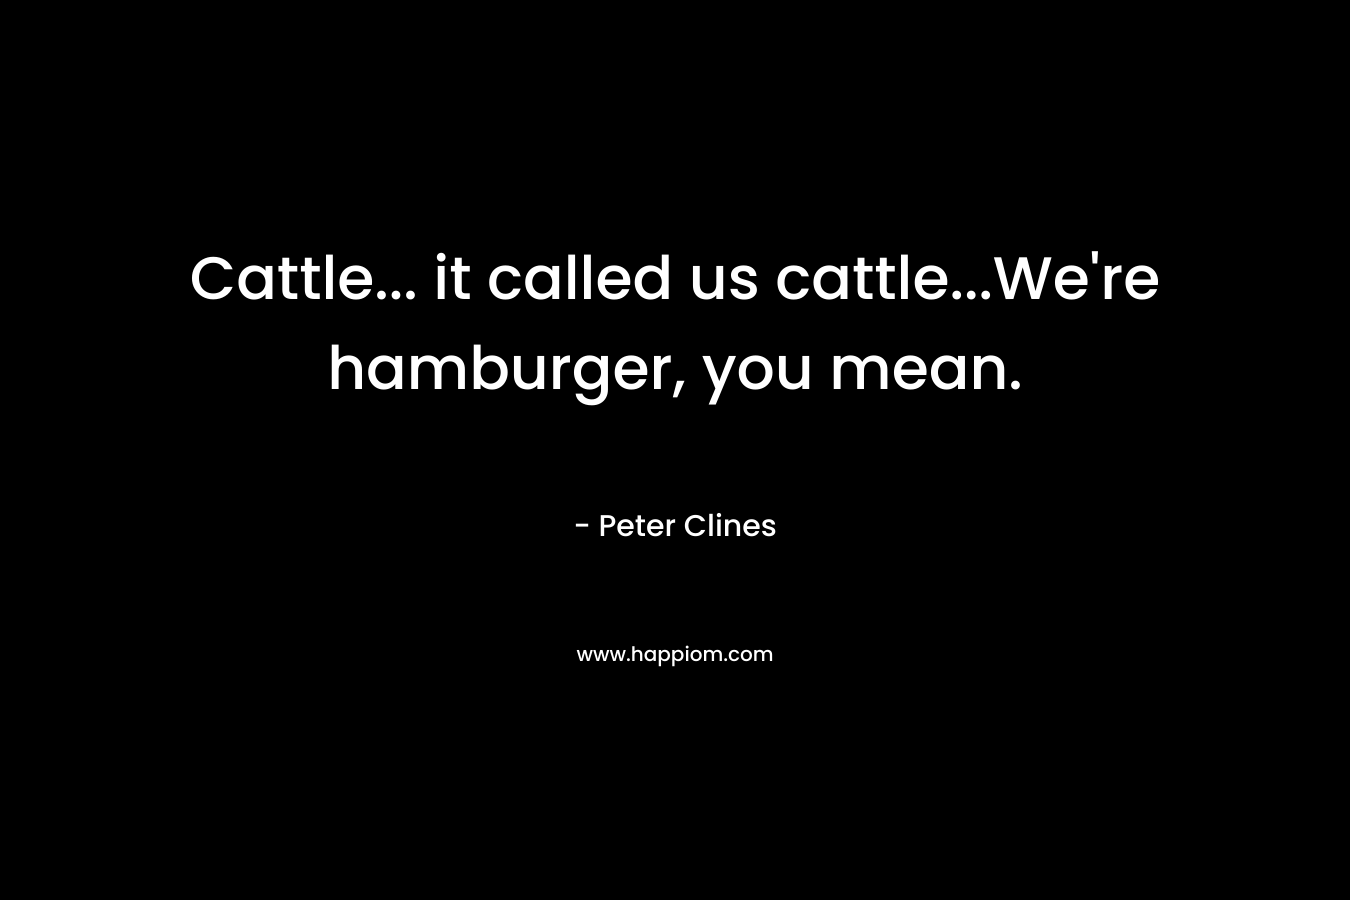 Cattle... it called us cattle...We're hamburger, you mean.